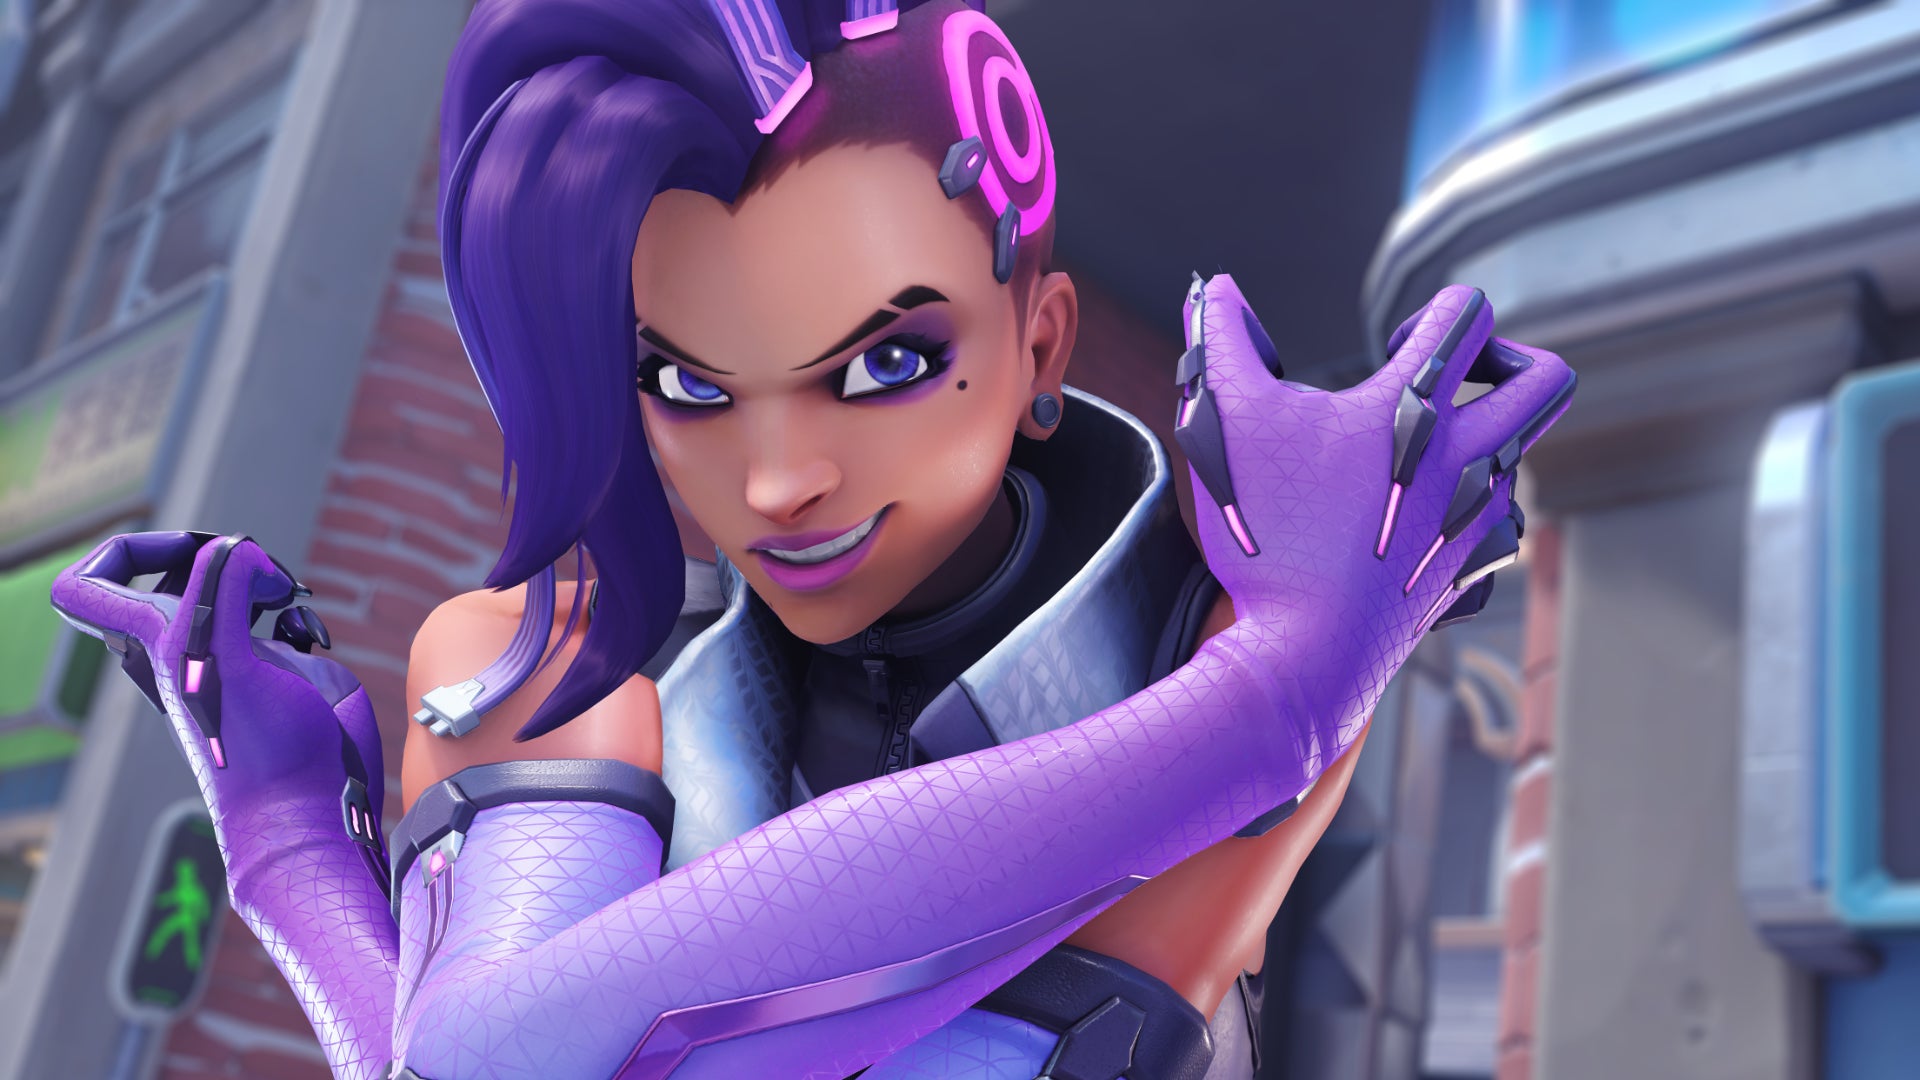 A close up of Sombra, a hero in Overwatch 2, smiling at the camera with her arms crossed and grabbing her shoulders.